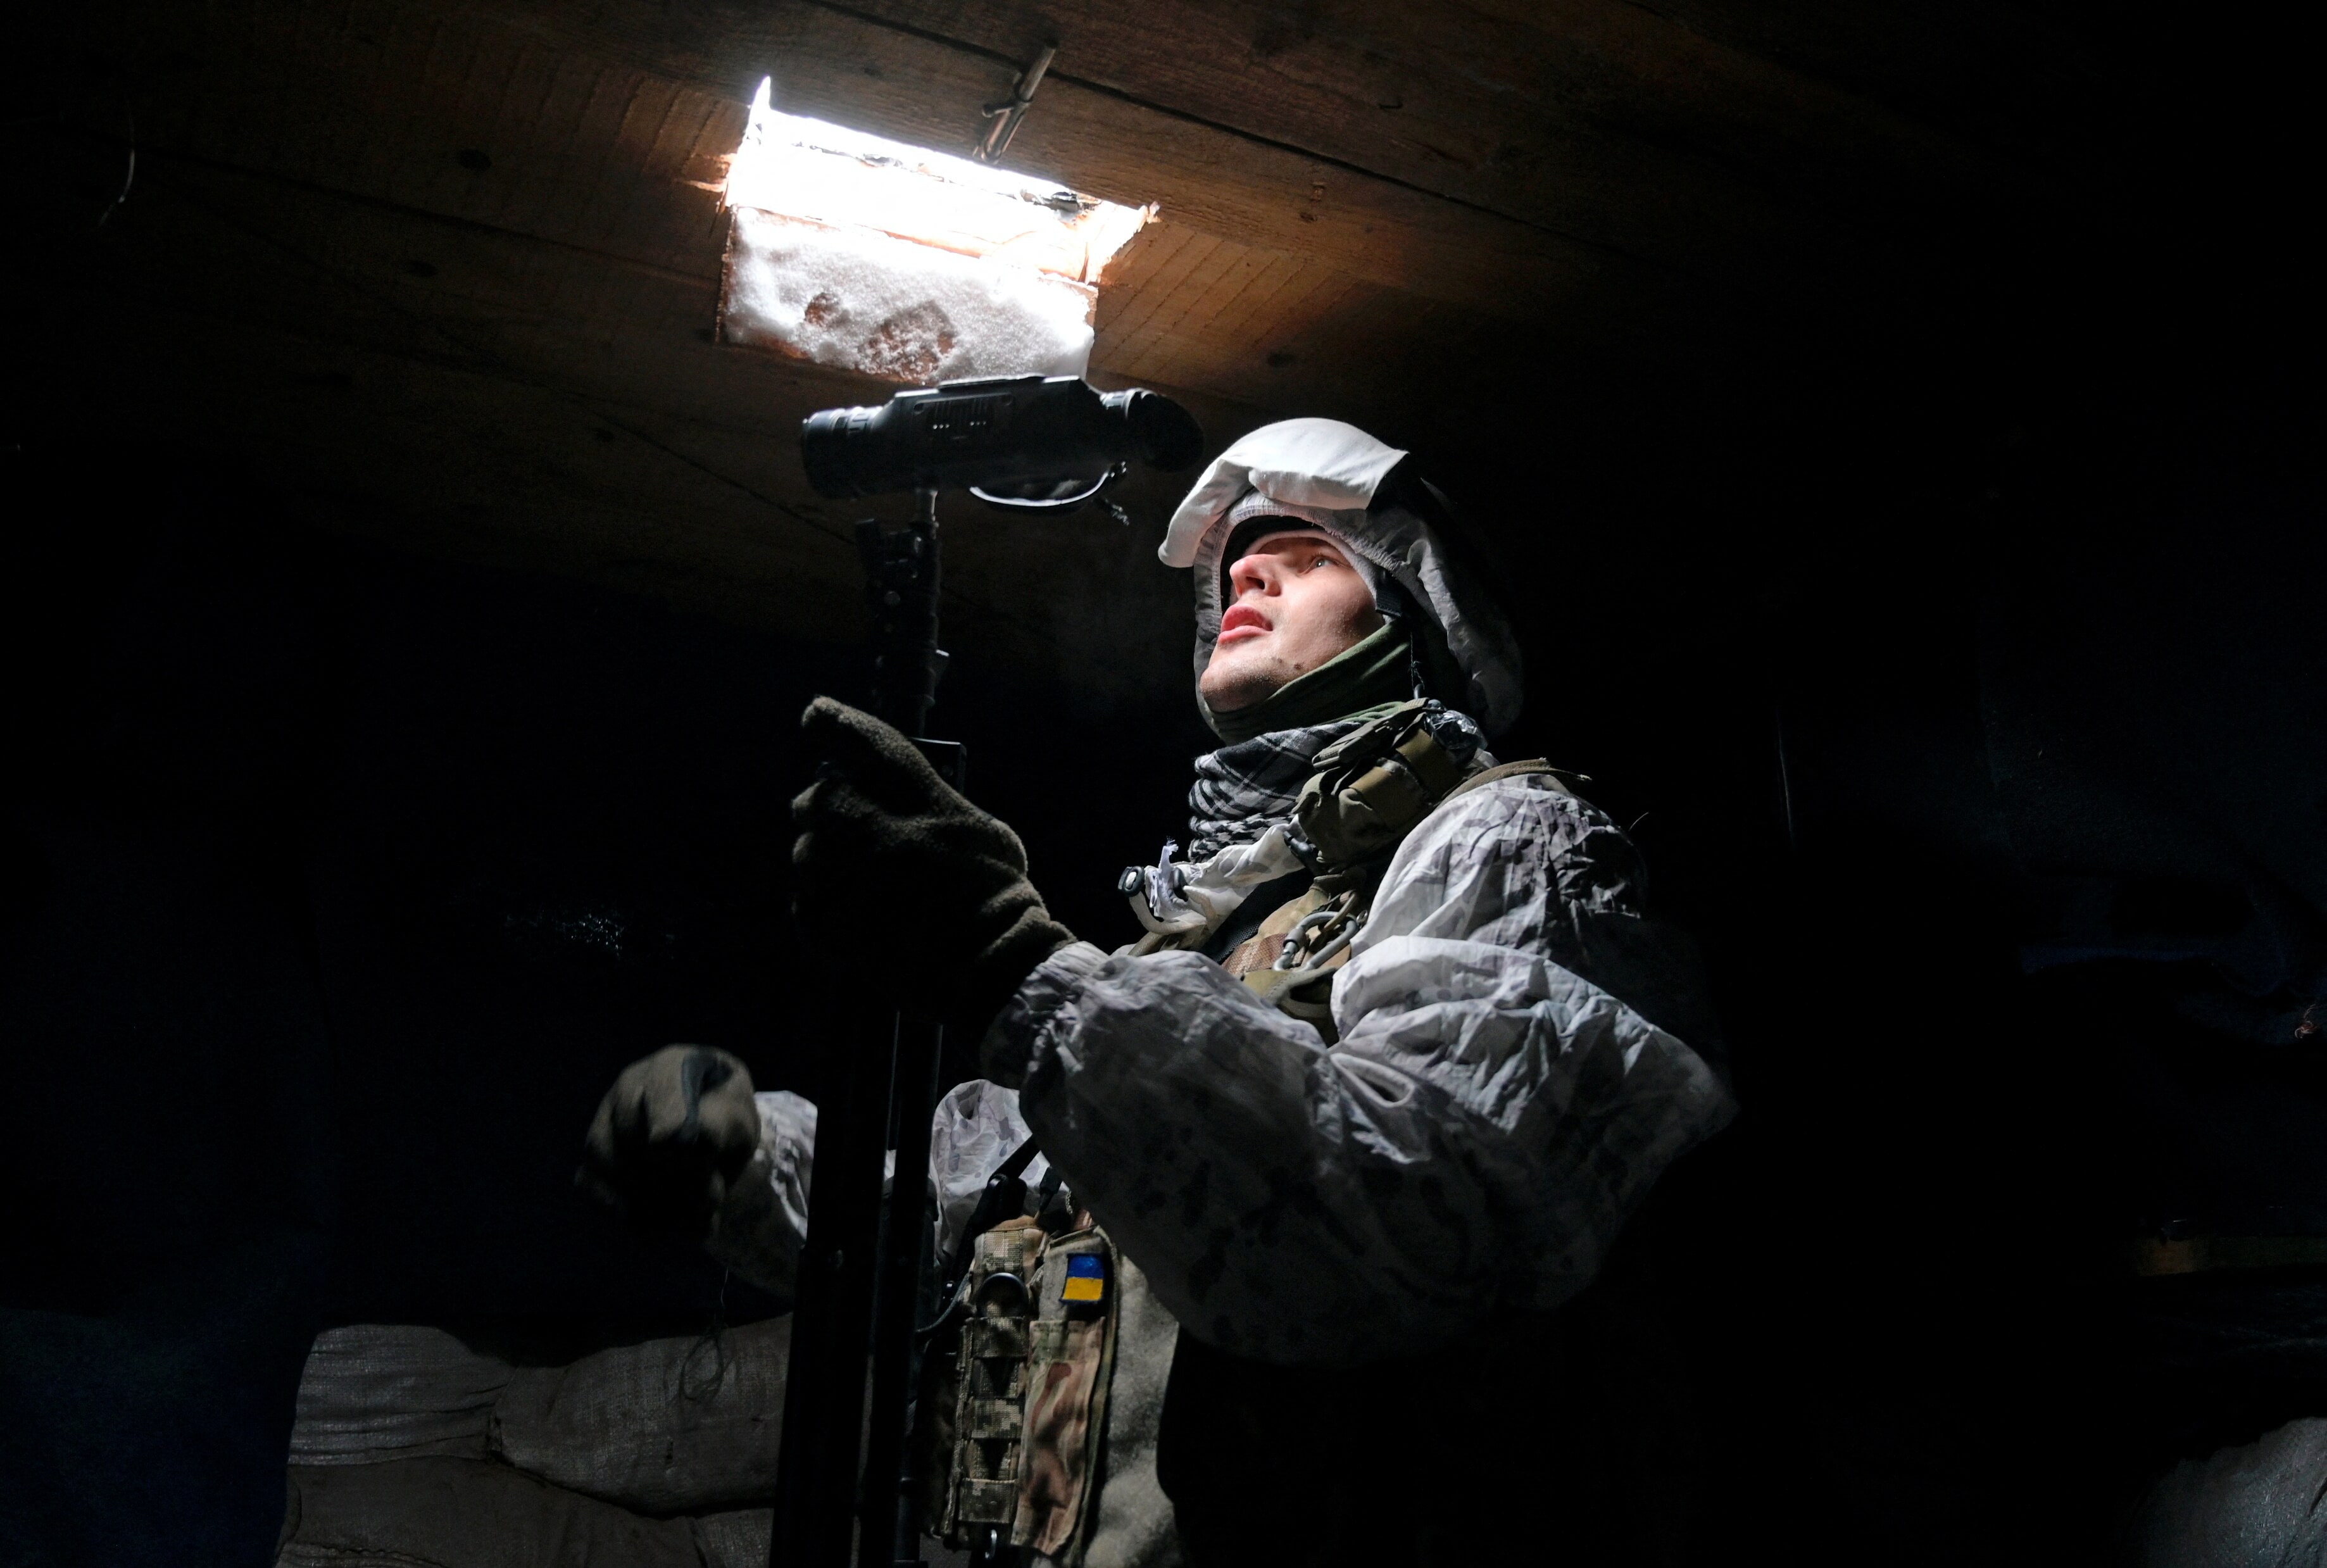 Tack - A service member of the Ukrainian armed forces is seen at combat positions in Donetsk Region in  Ukraine on January 25, 2022. Reuters